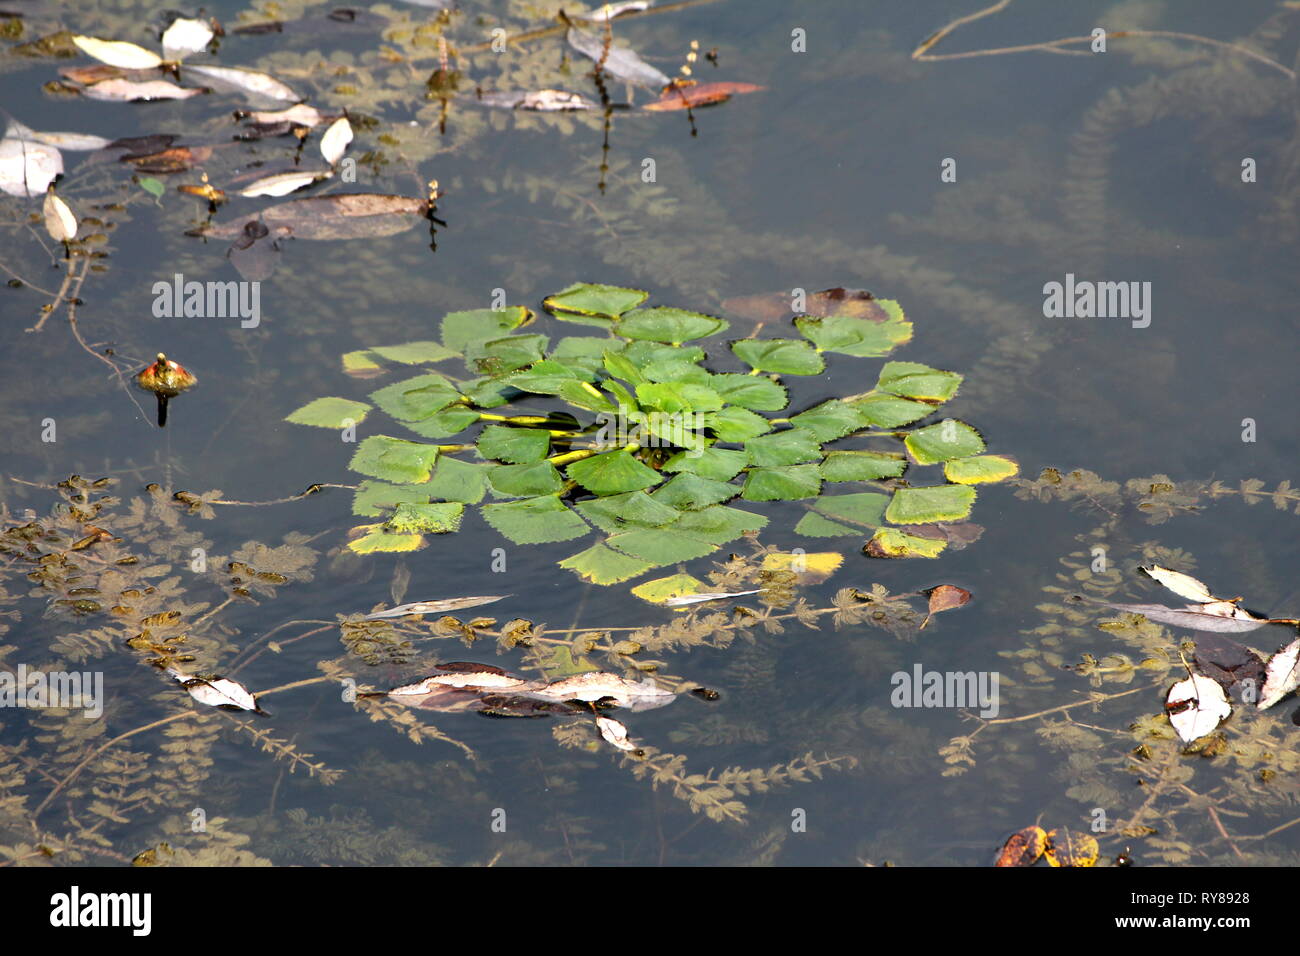 Water chestnut or Eleocharis dulcis or Chinese water chestnut grass like aquatic vegetable sedge with thick green leaves floating in local lake Stock Photo